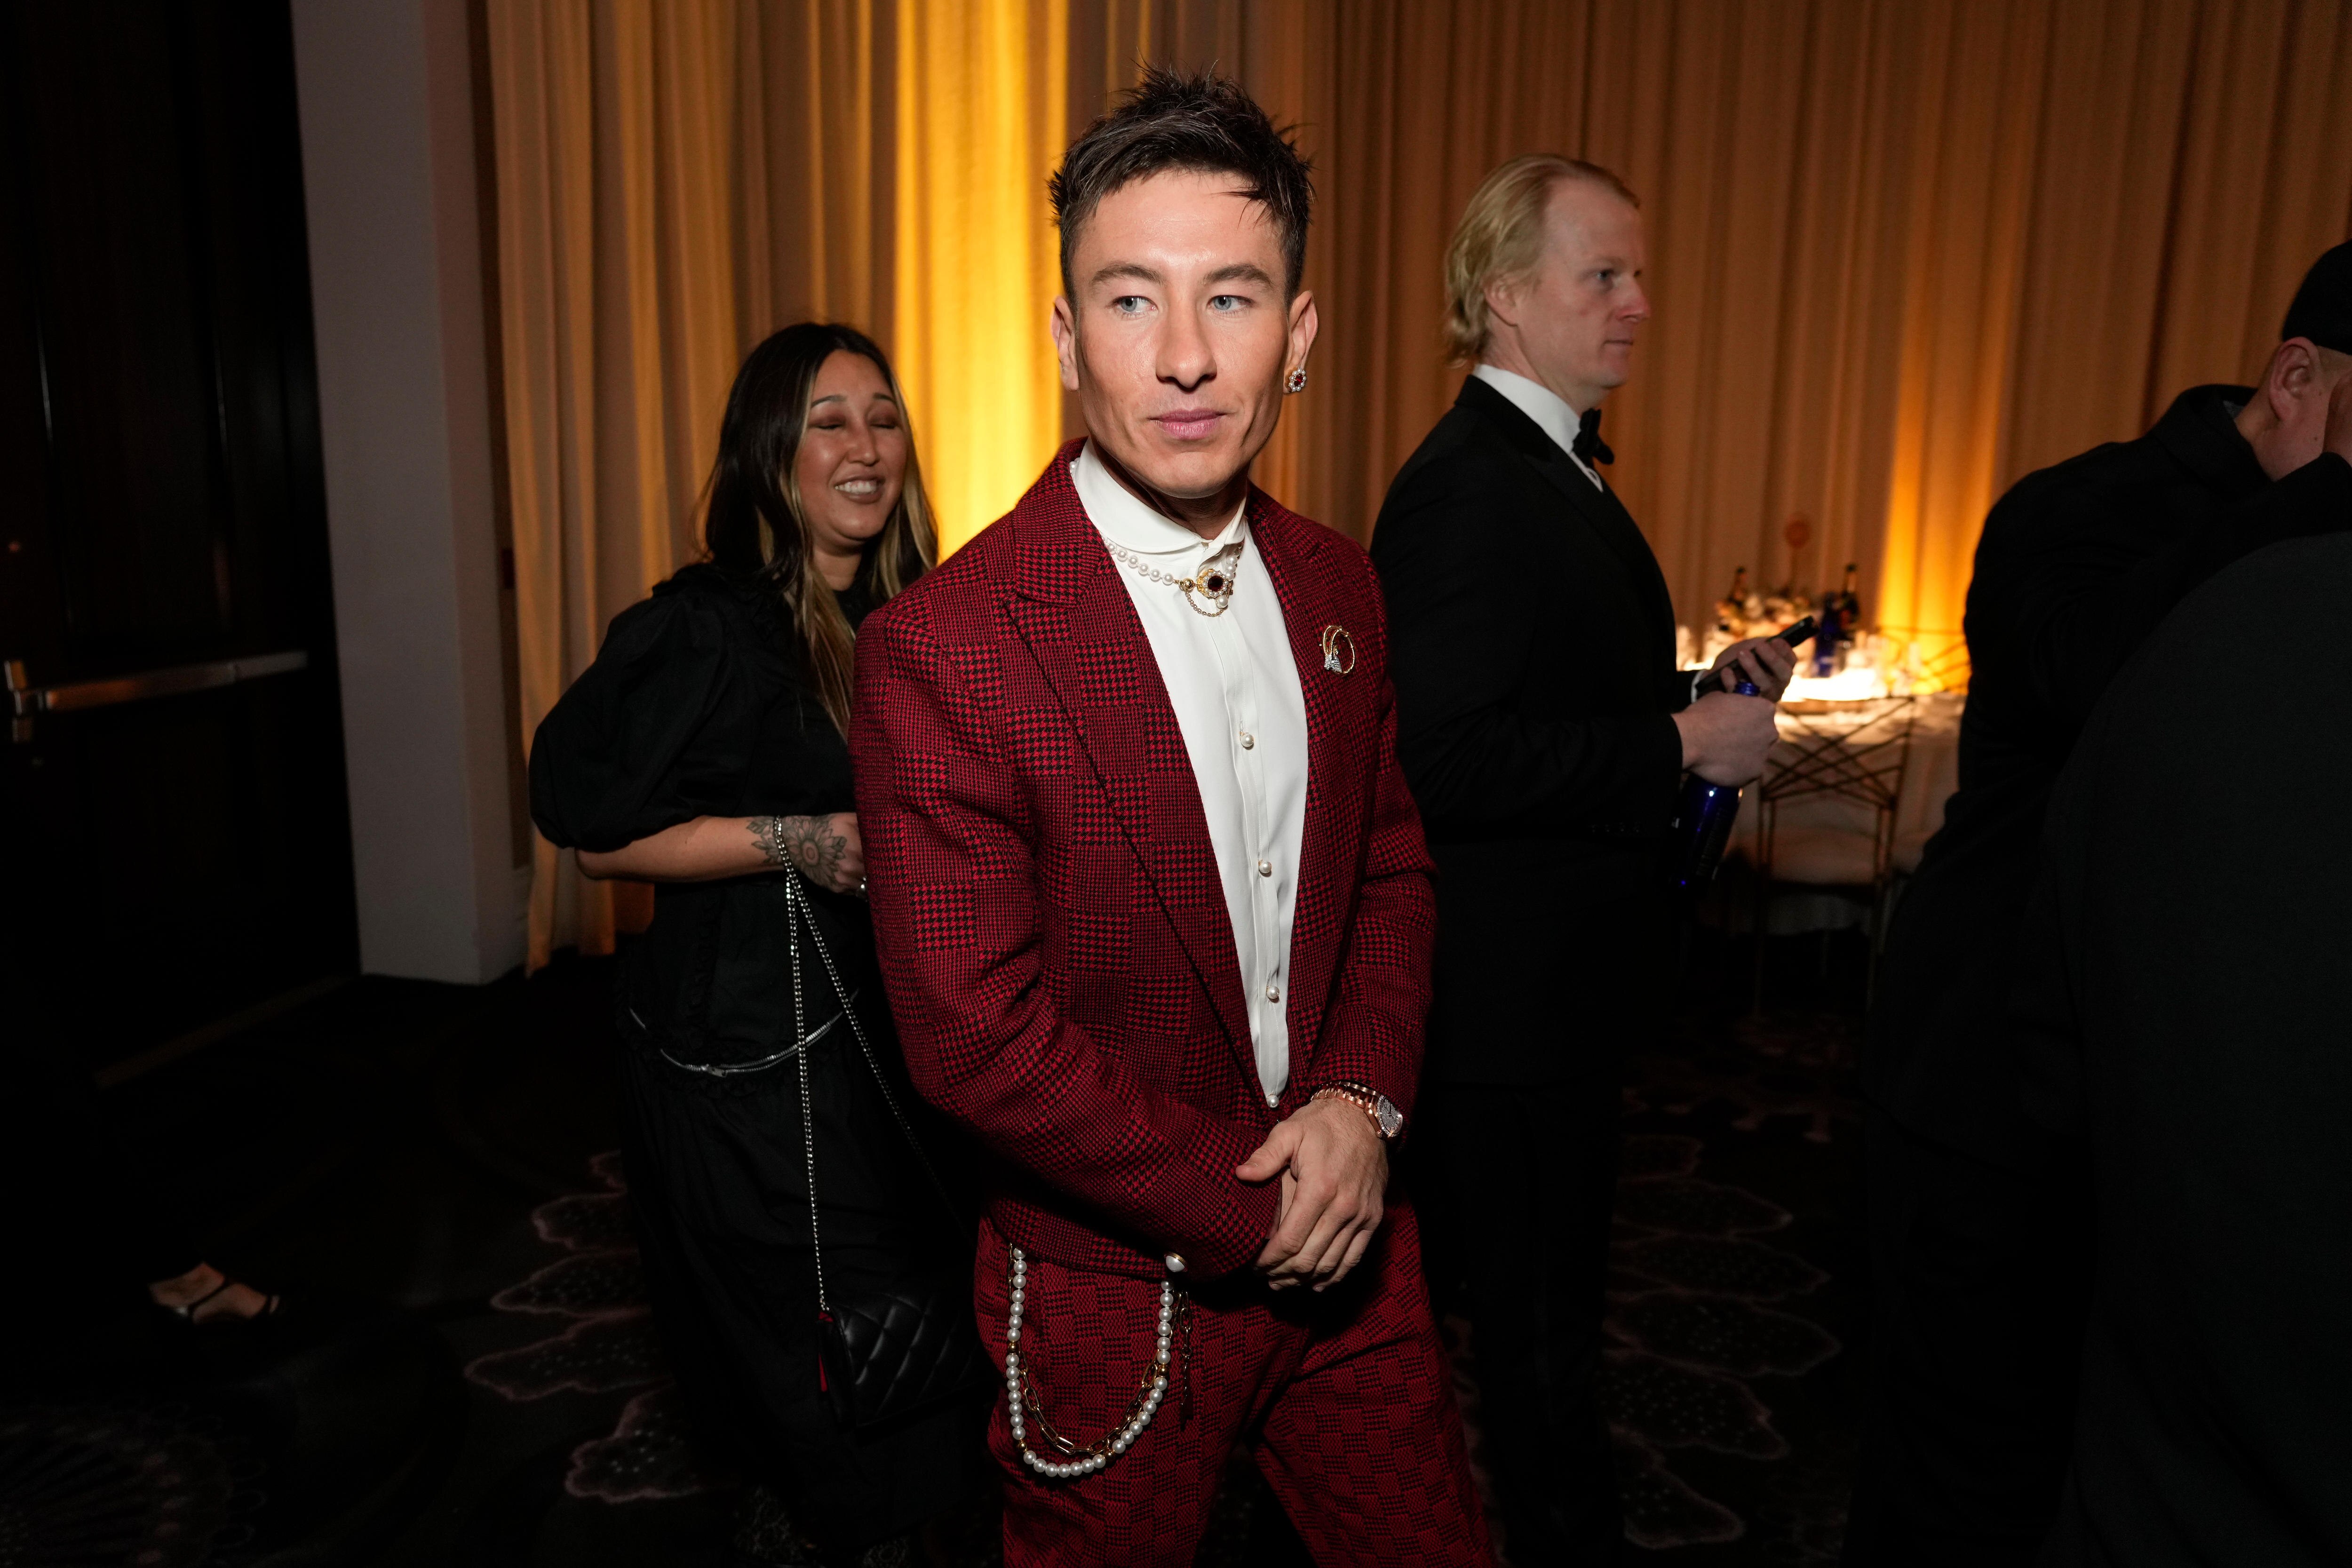 Actor Barry Keoghan at the Golden Globes wearing a red checkered suit